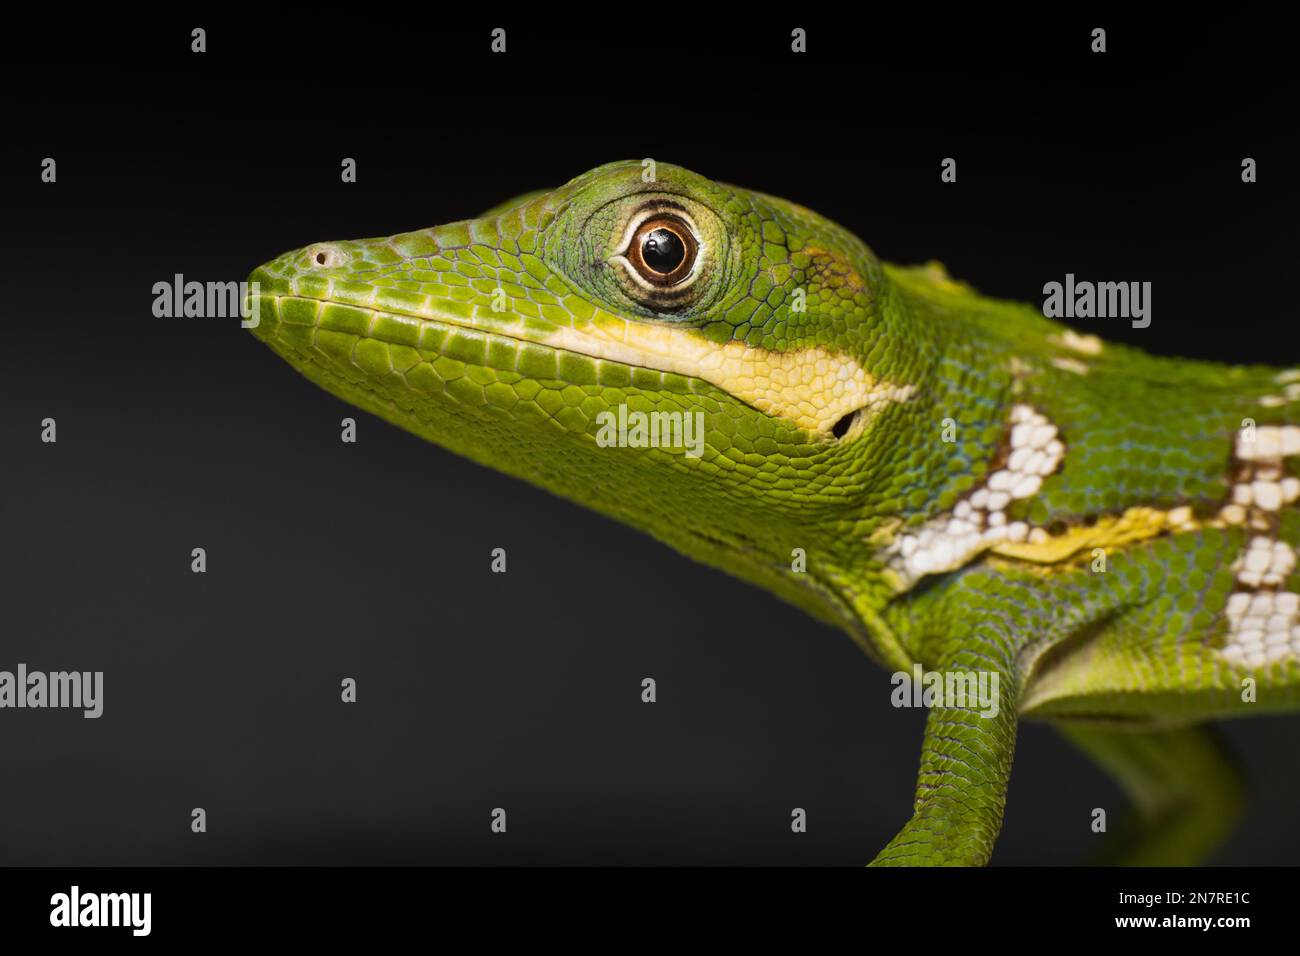 A side view portrait of a Cuban knight anole lizard with blur dark background Stock Photo